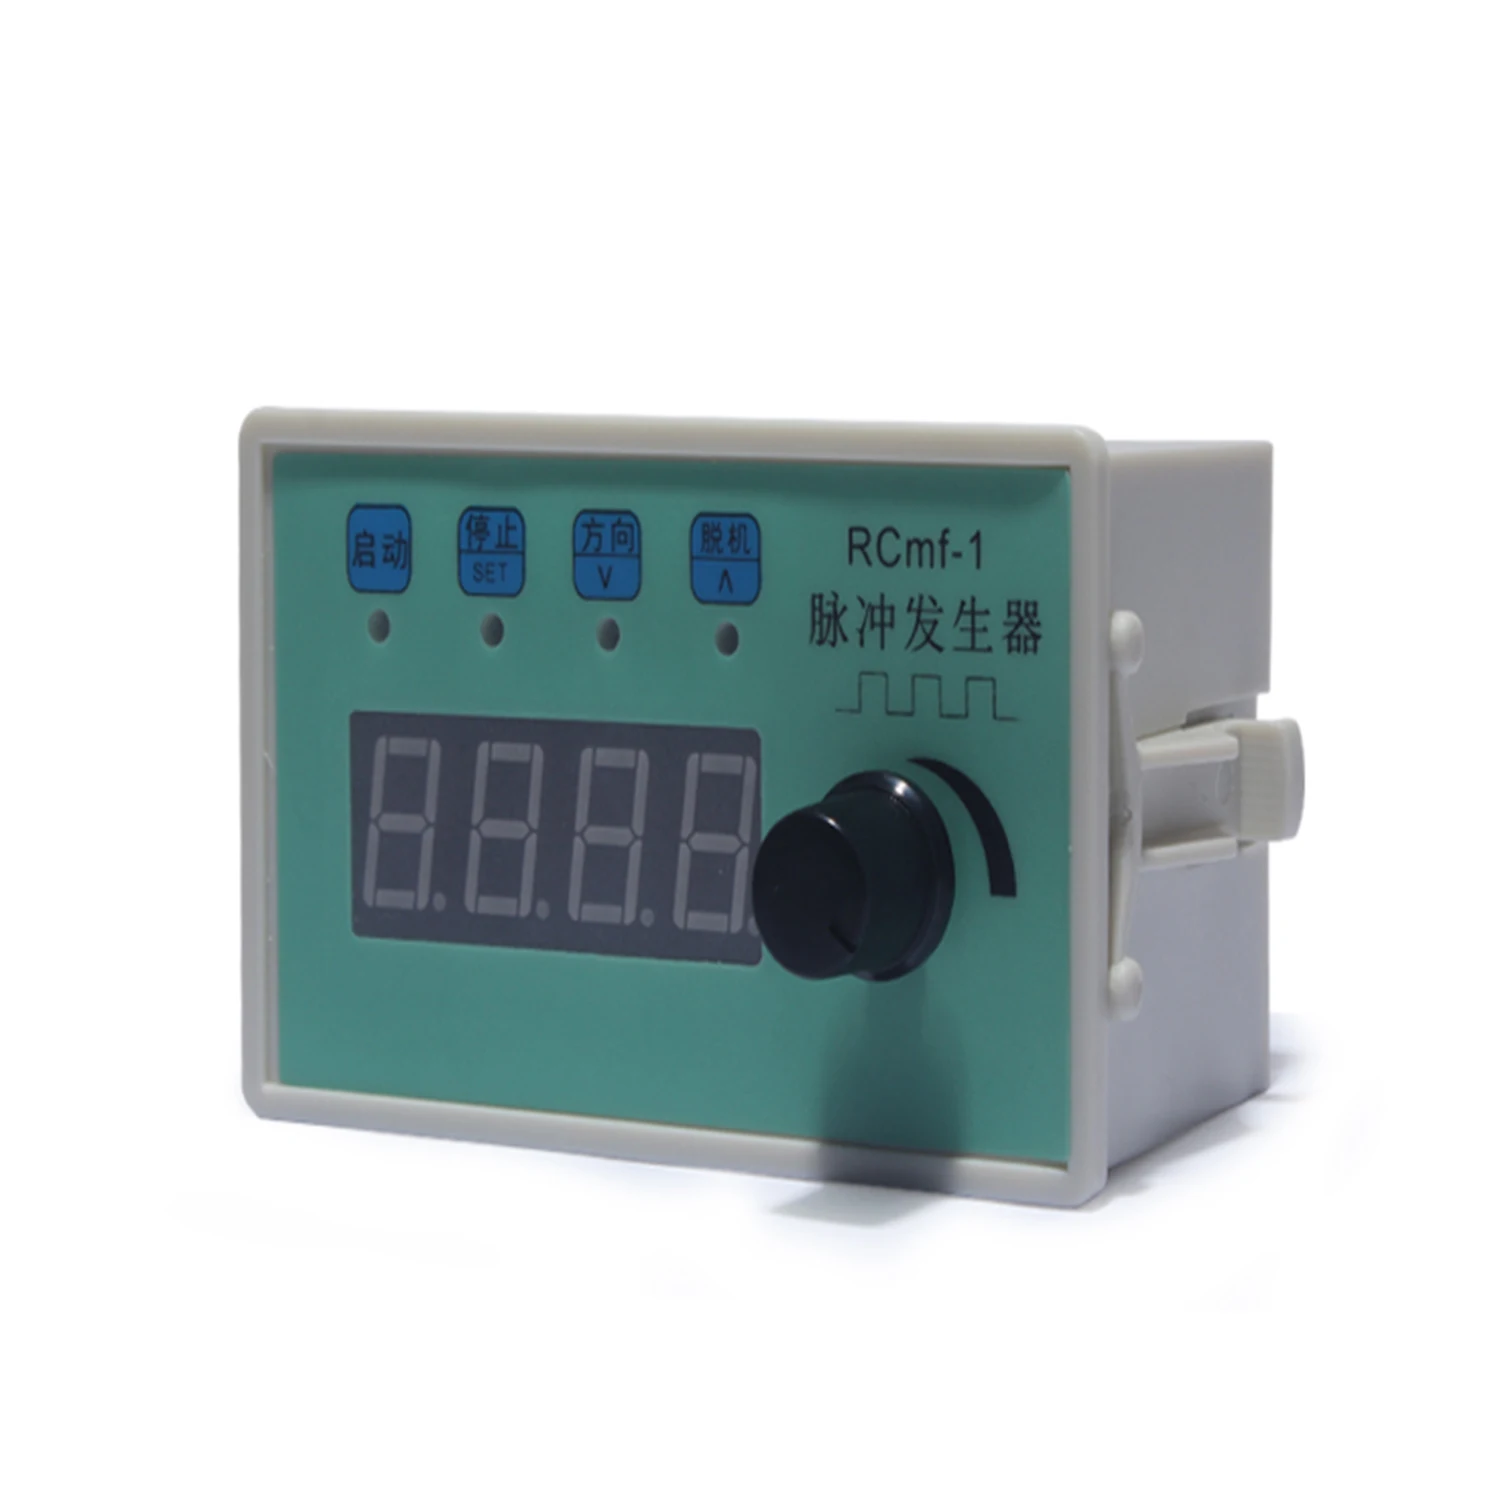 Details about   Equipment Pulse Generator High Speed Adjustment Rcmf‑1 Fixed Length Controller